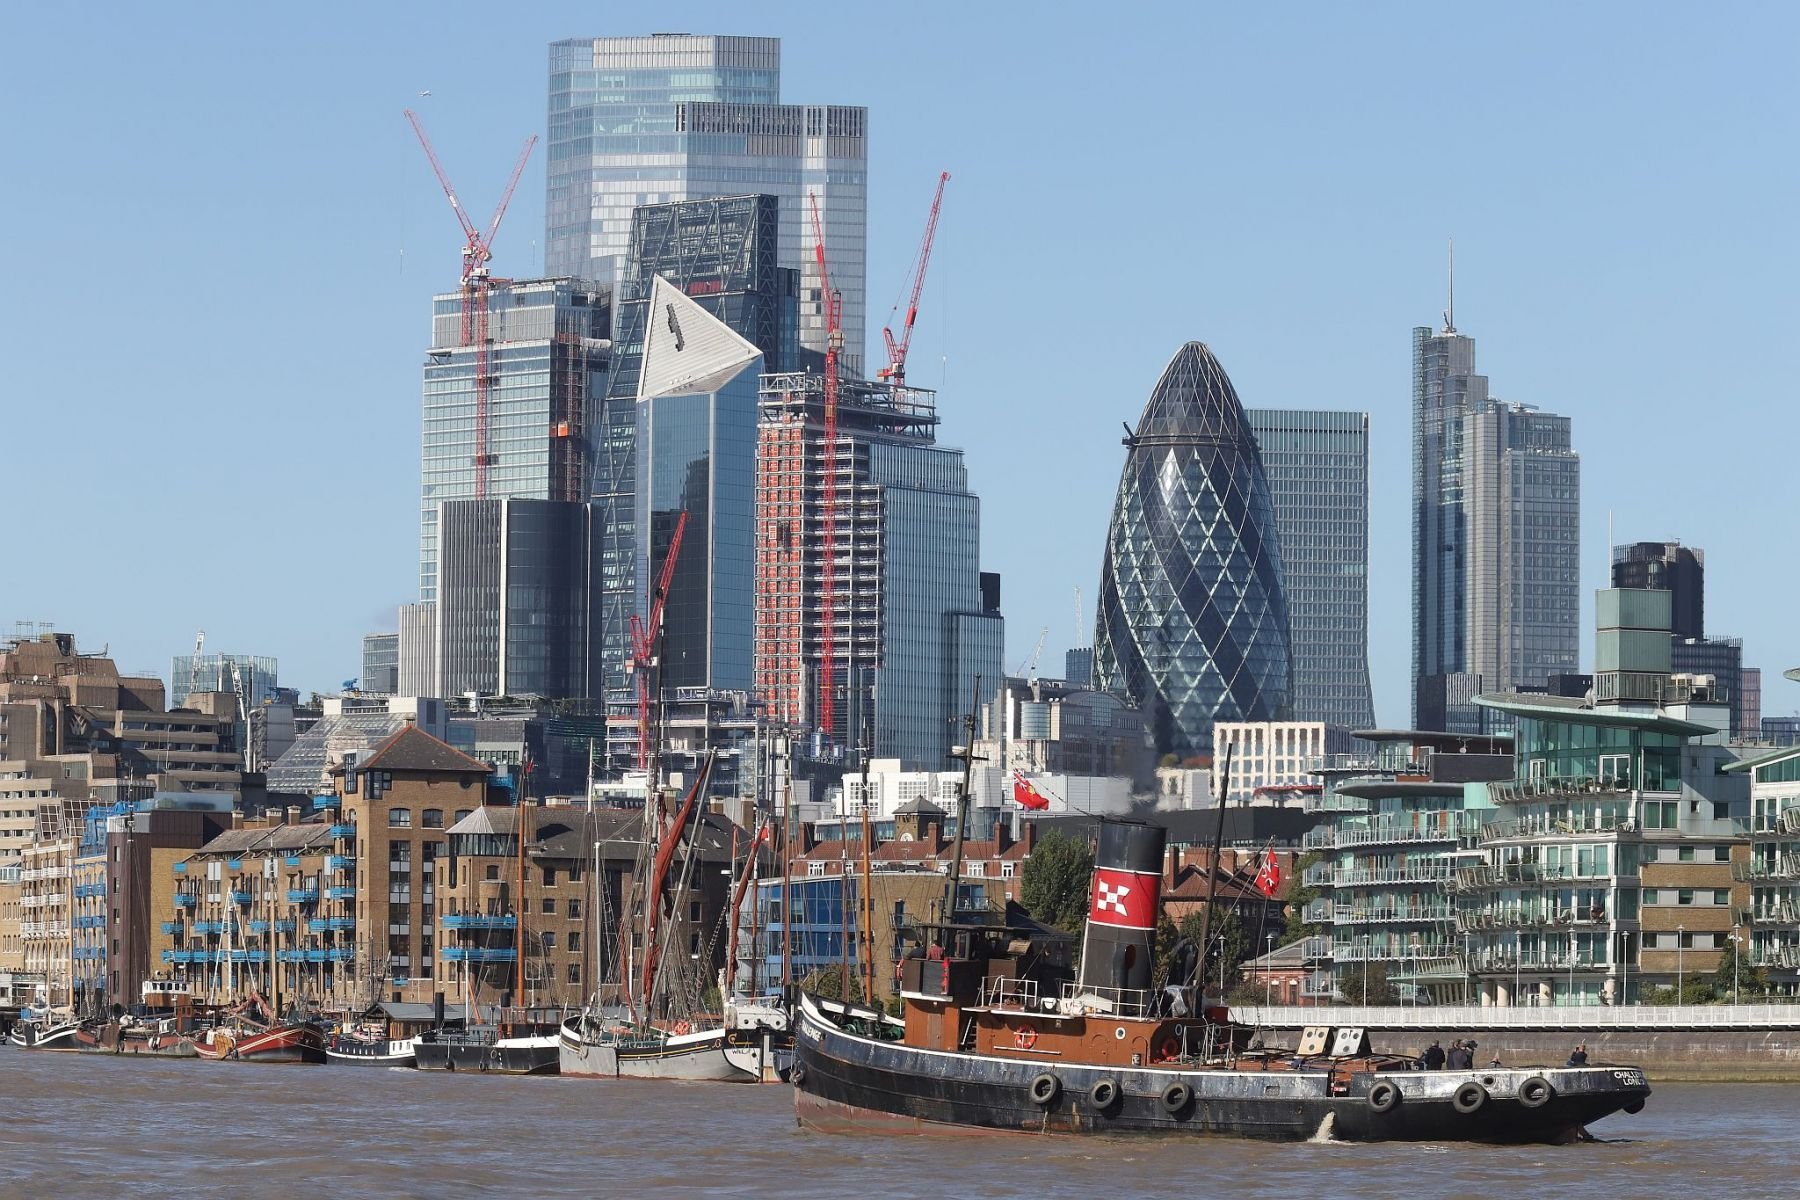 Steam Tug Challenge with the City of London in the background in 2022